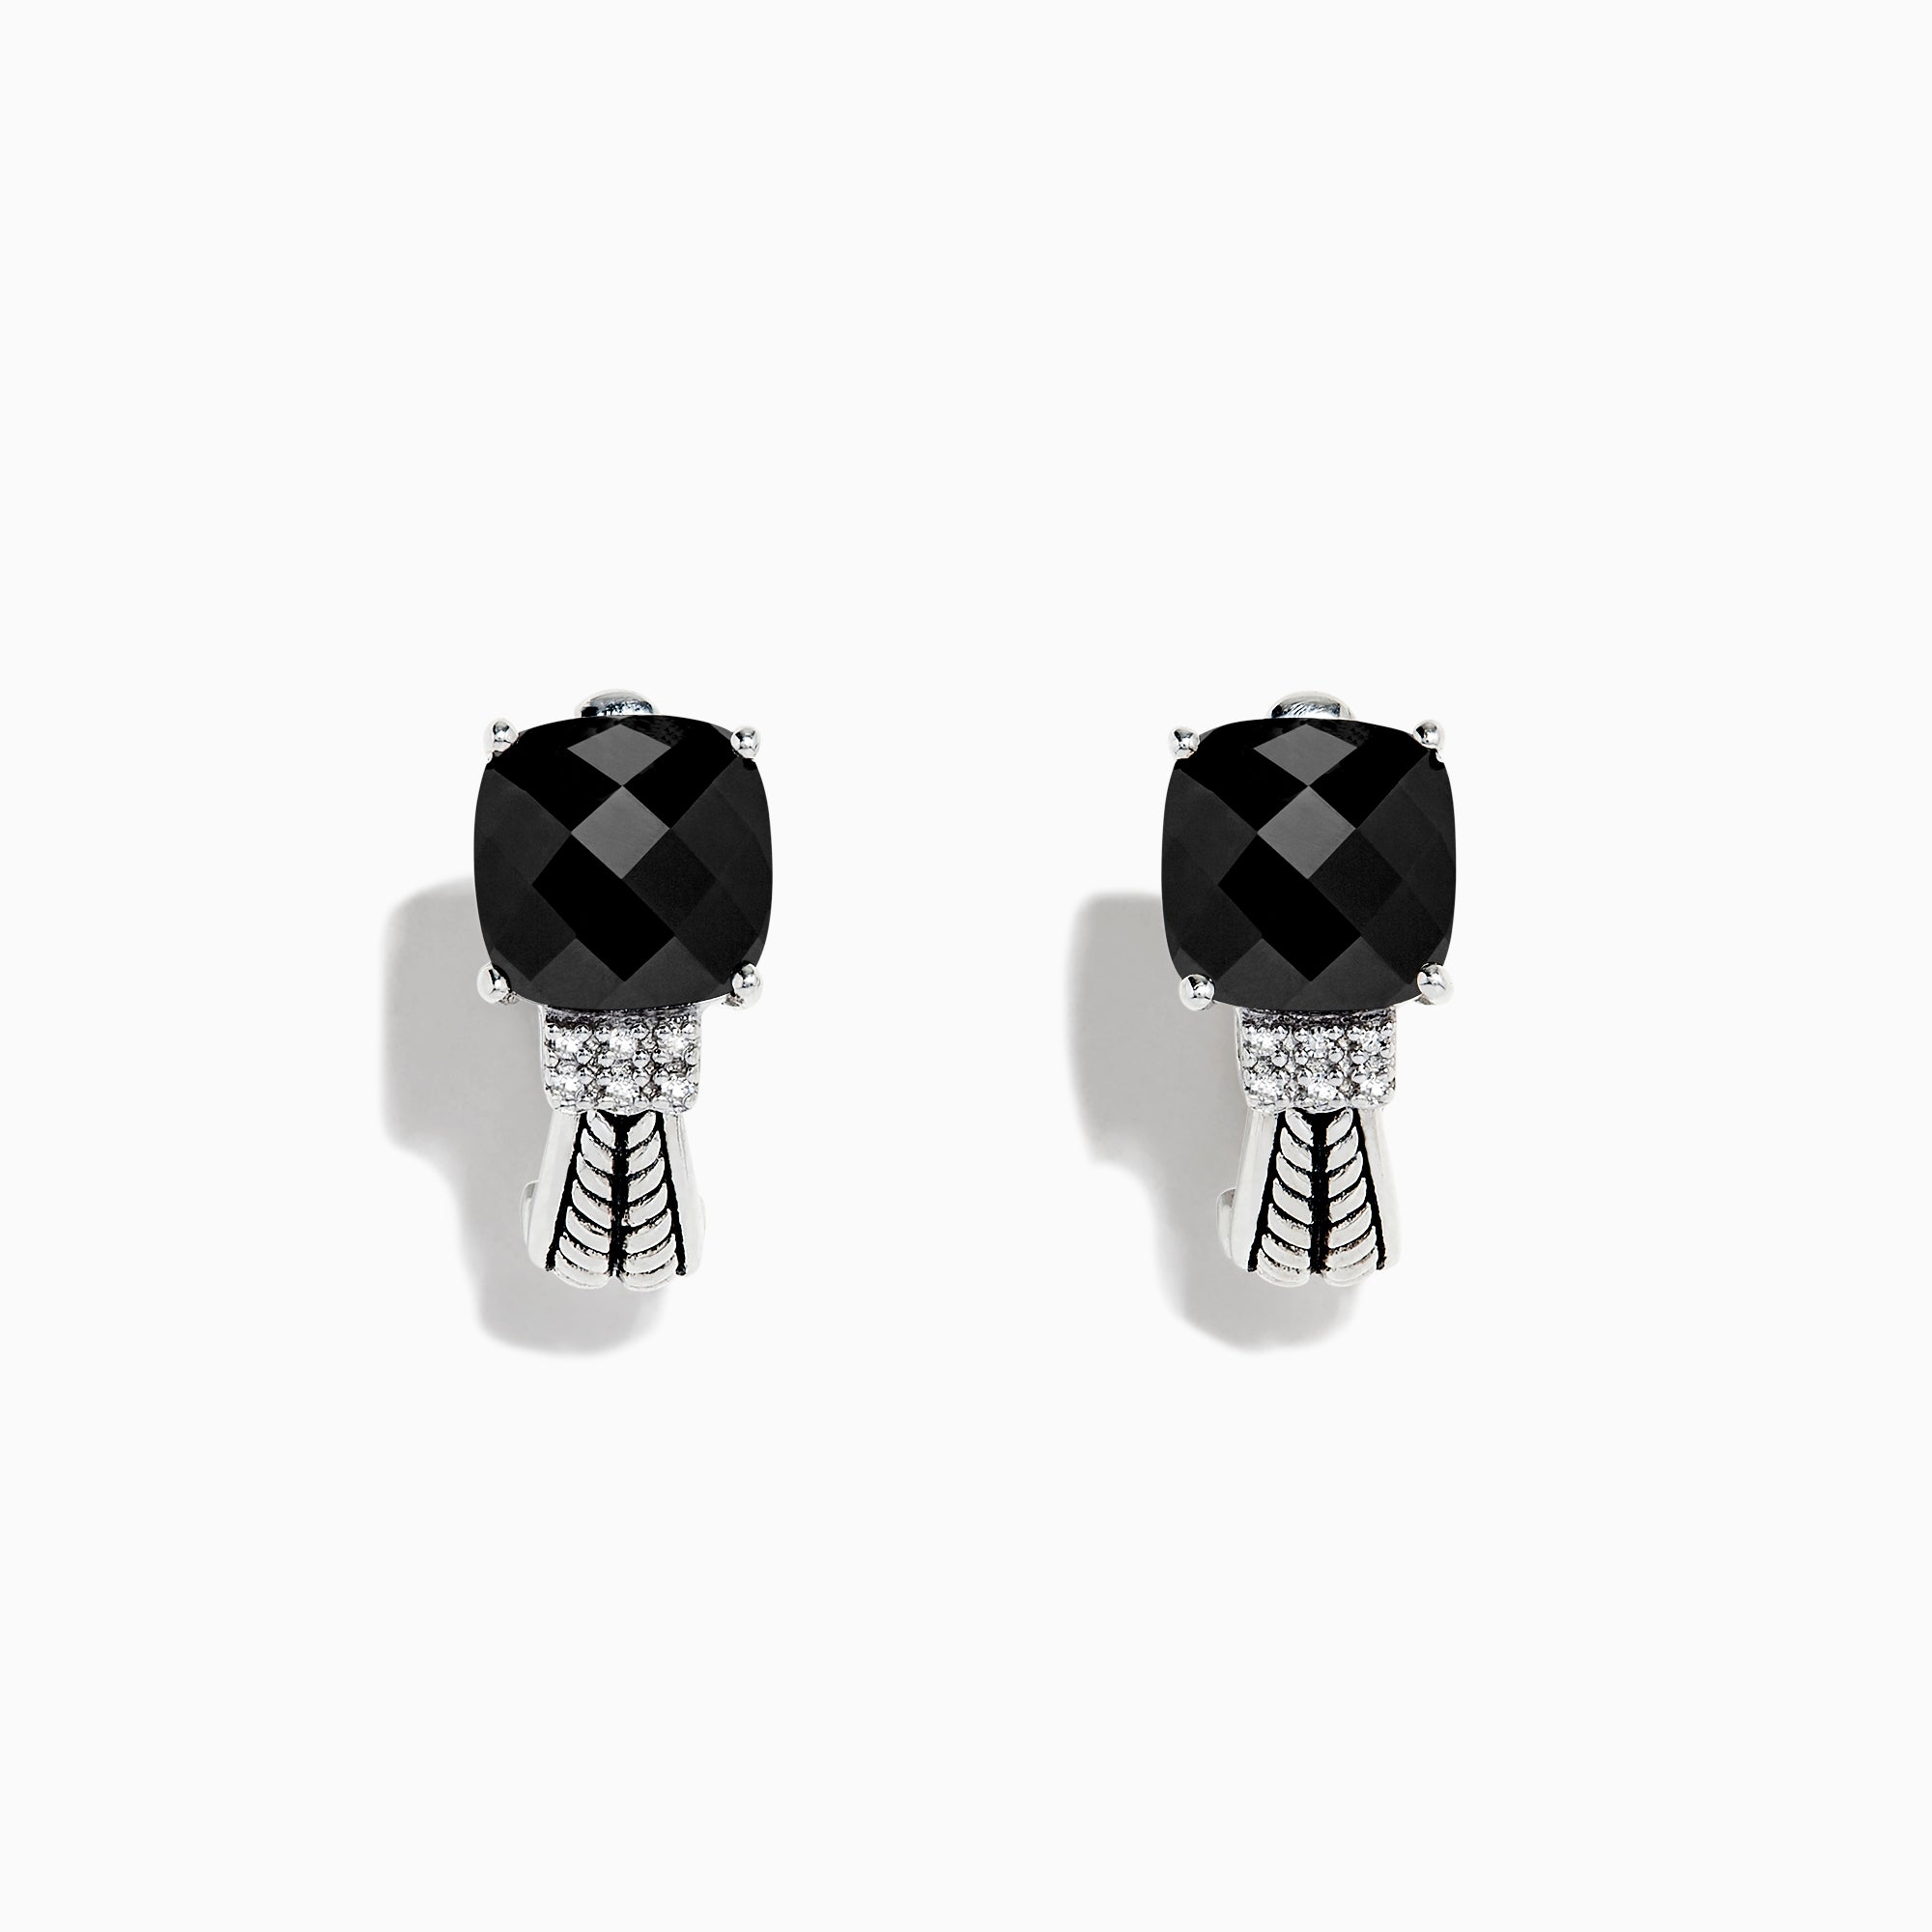 Onyx Silver Wire Earrings in 925 Sterling Silver 1.5 Jewelry RS14-142 -  Silver Wholesale 925